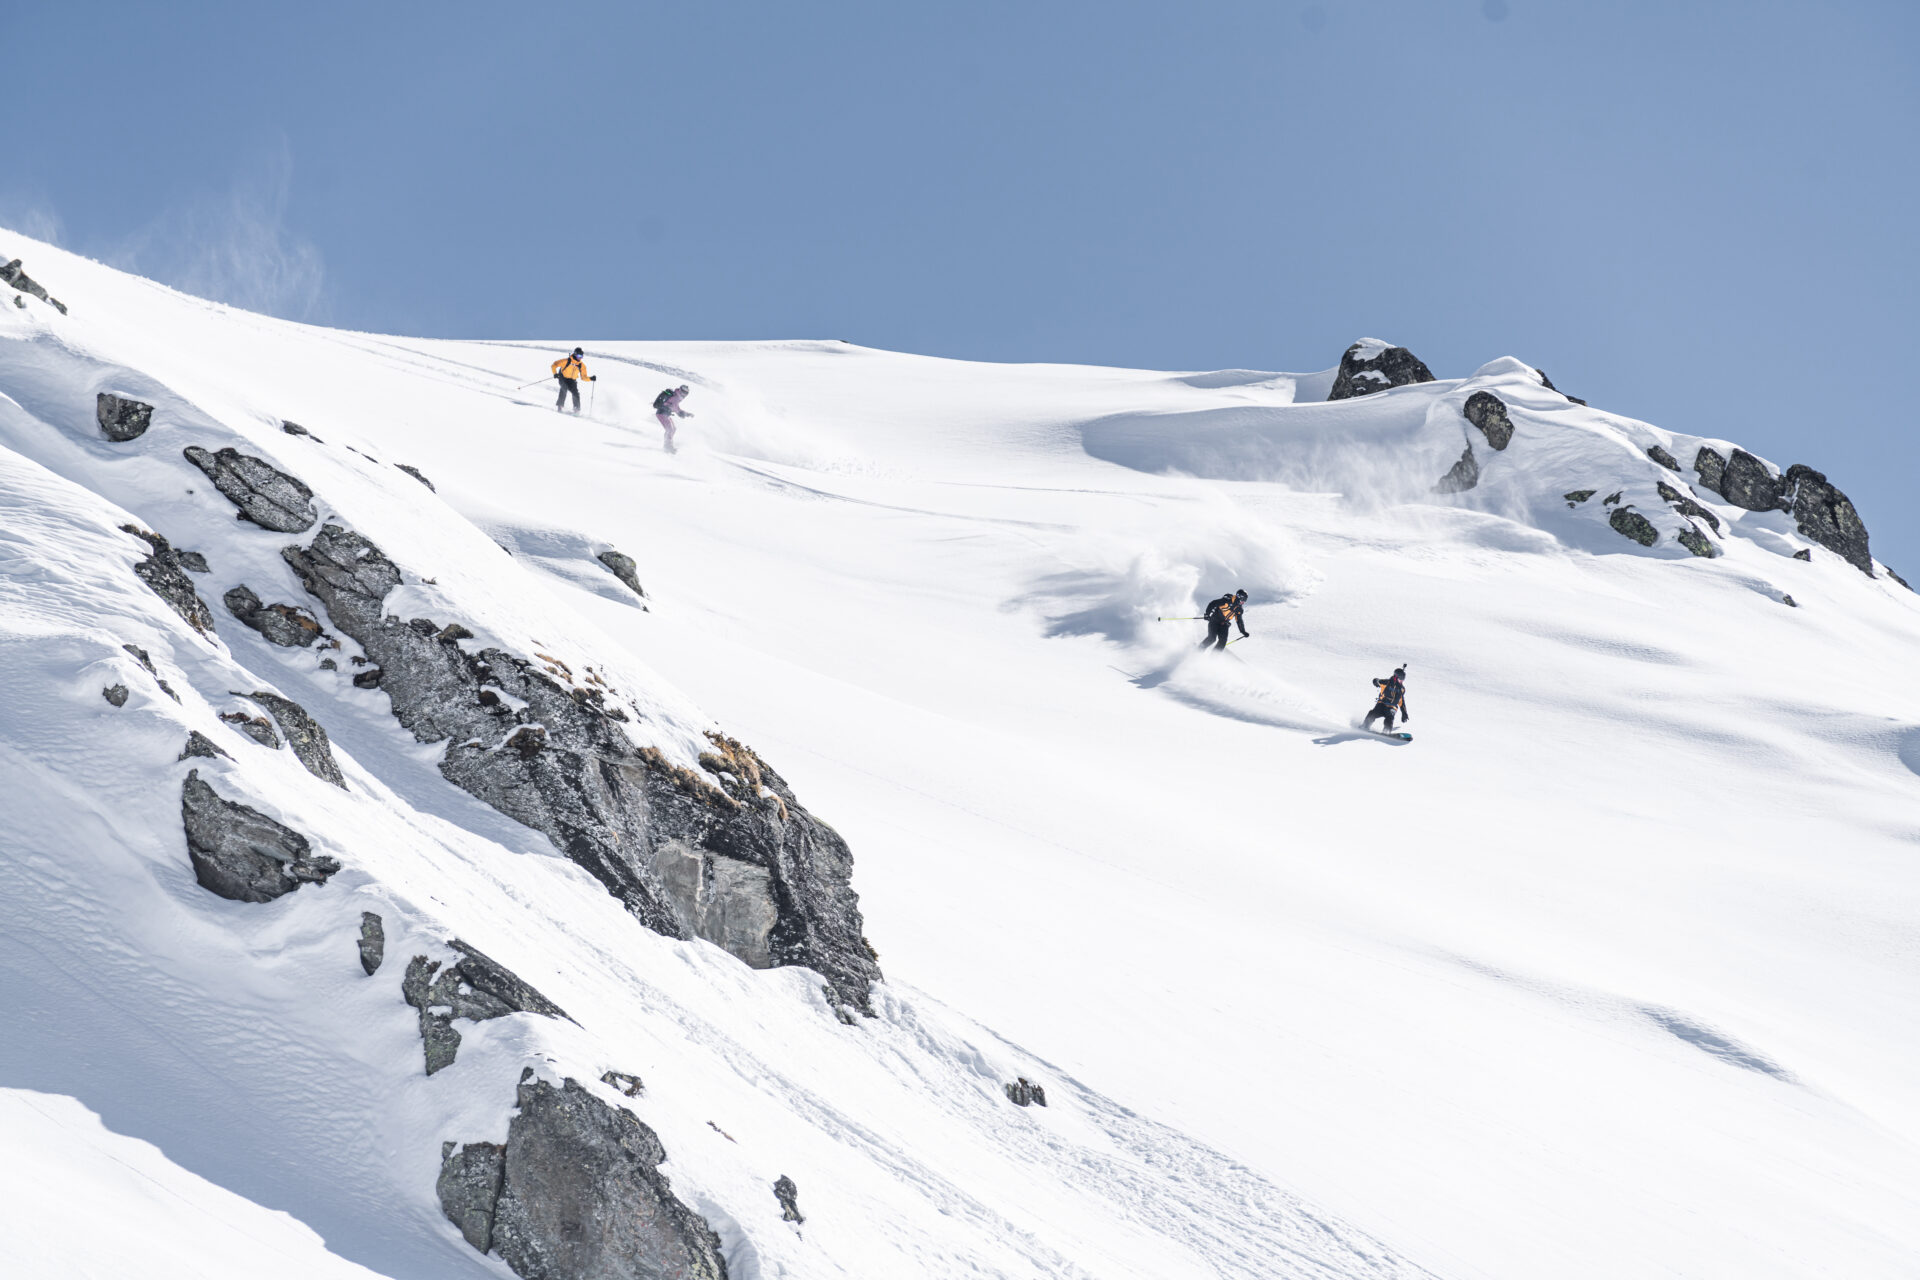 An image of skiers in Les Arcs